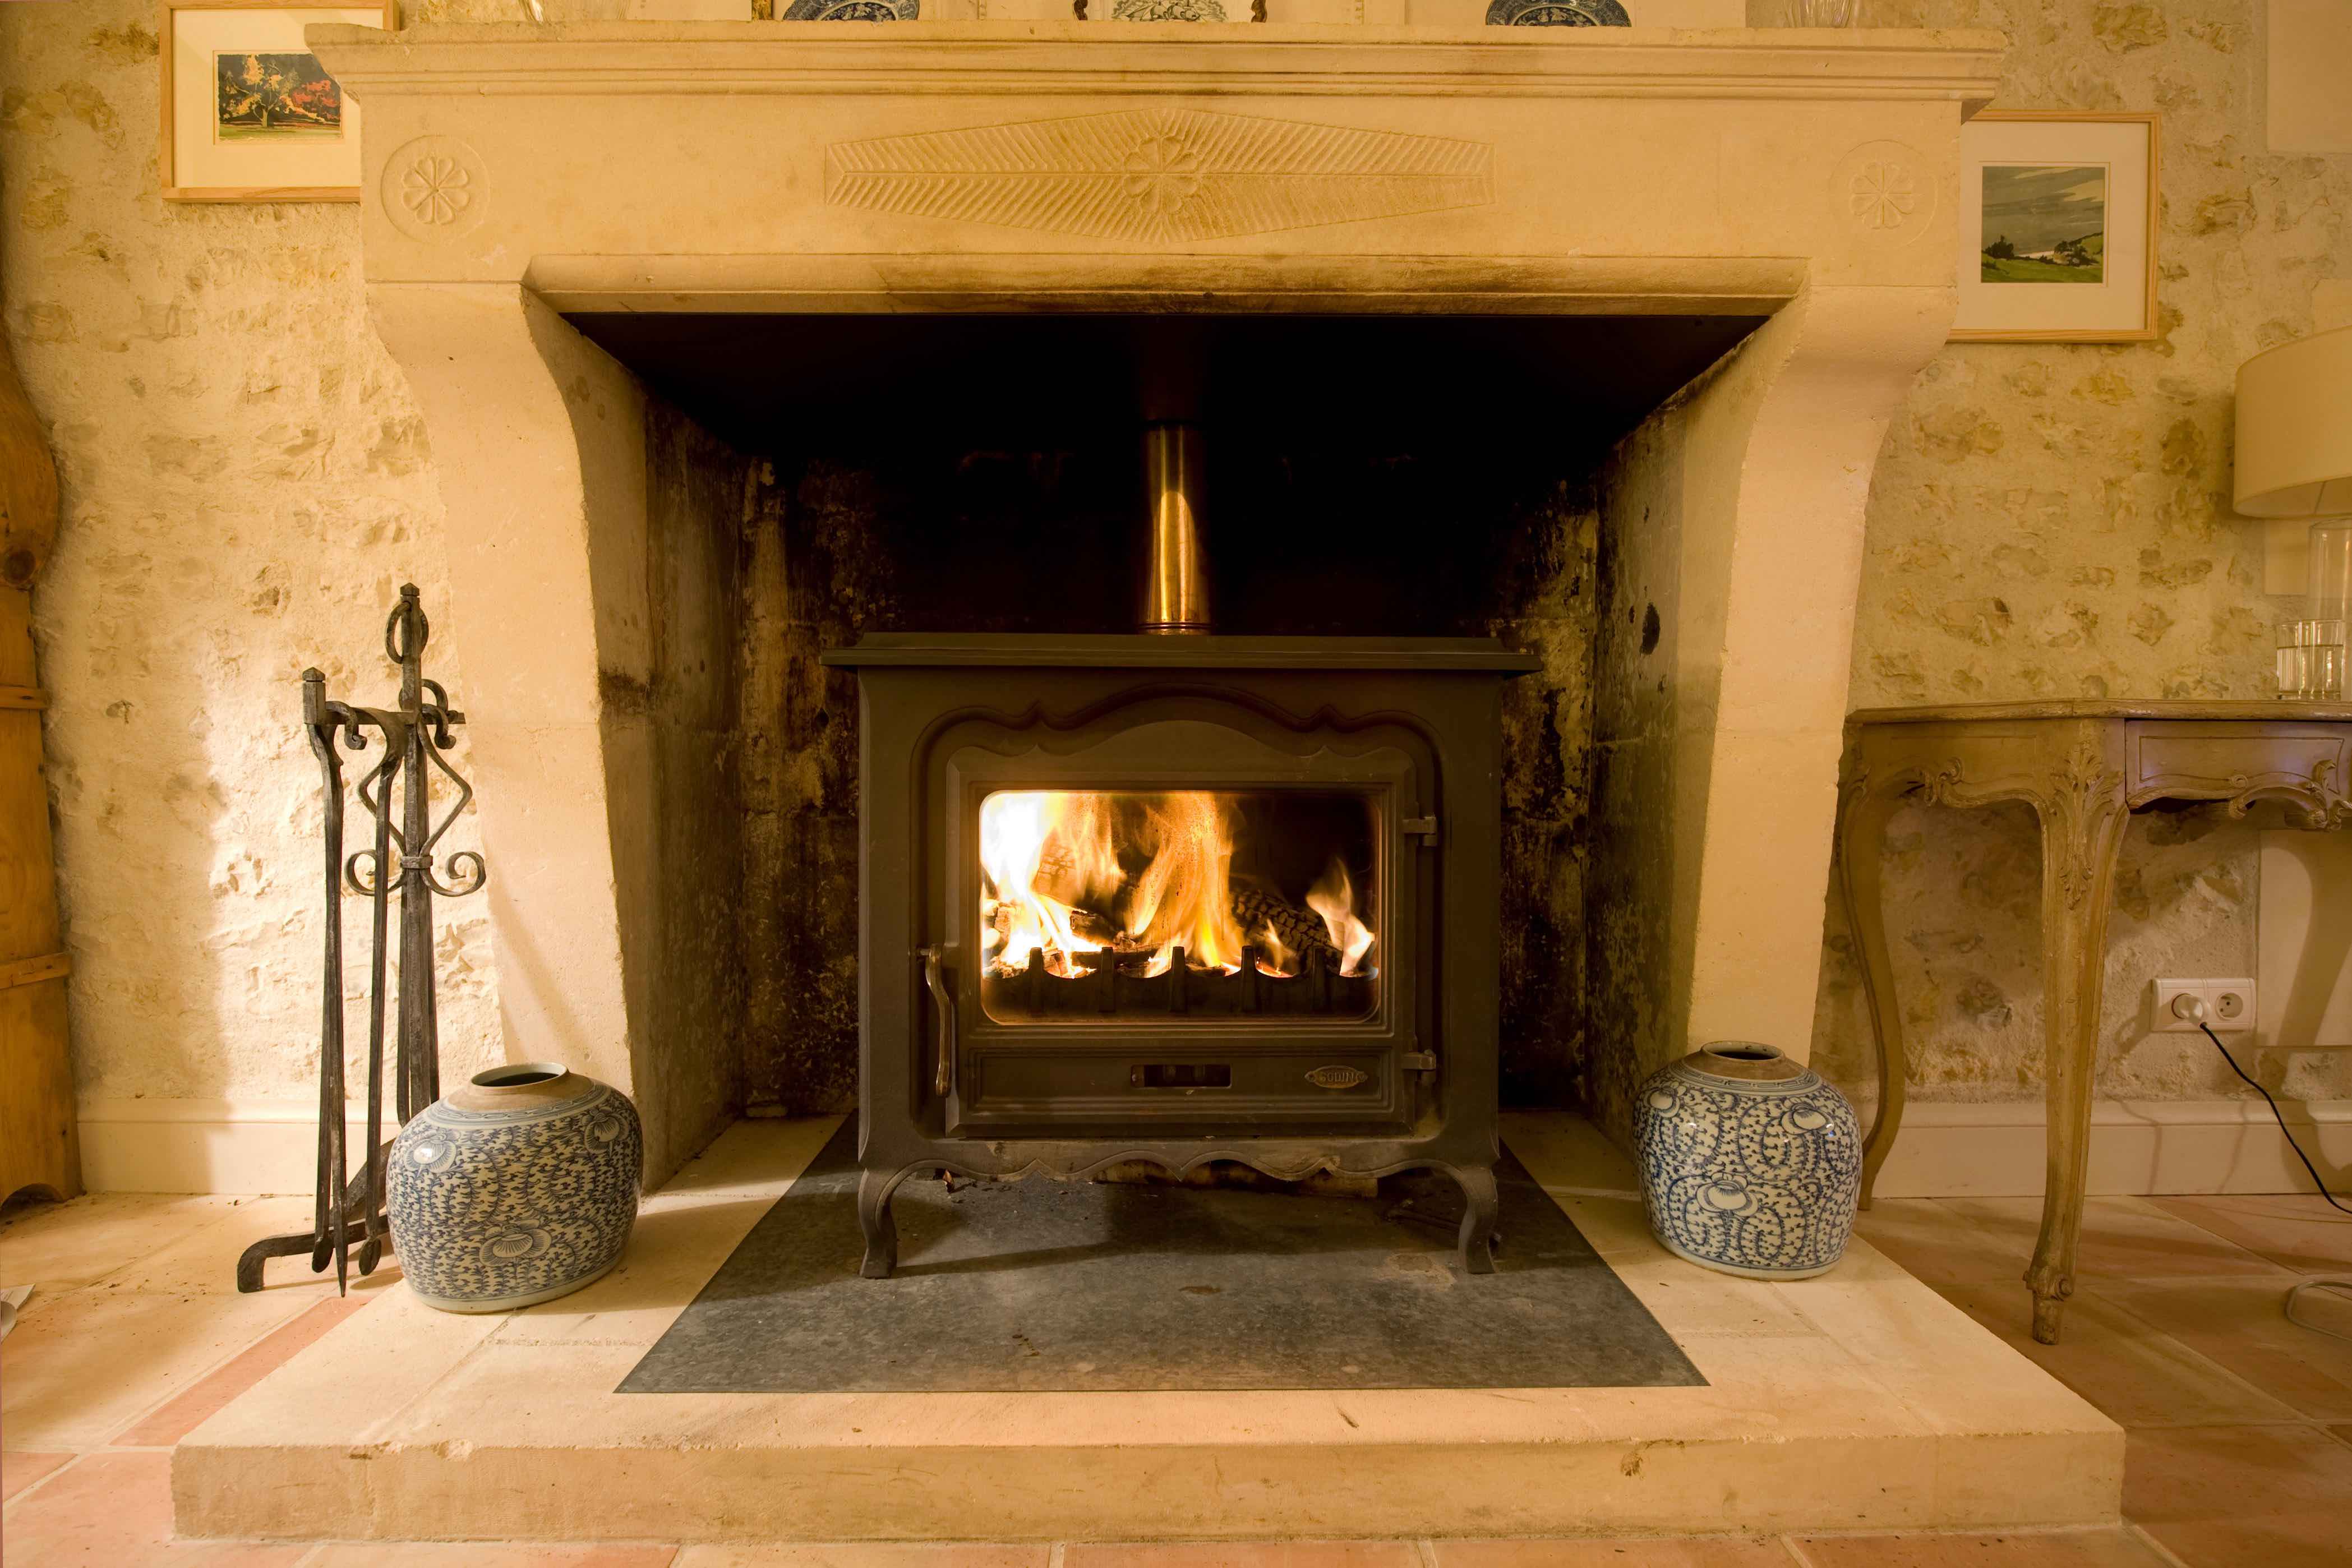 How to get the most from your wood-burner